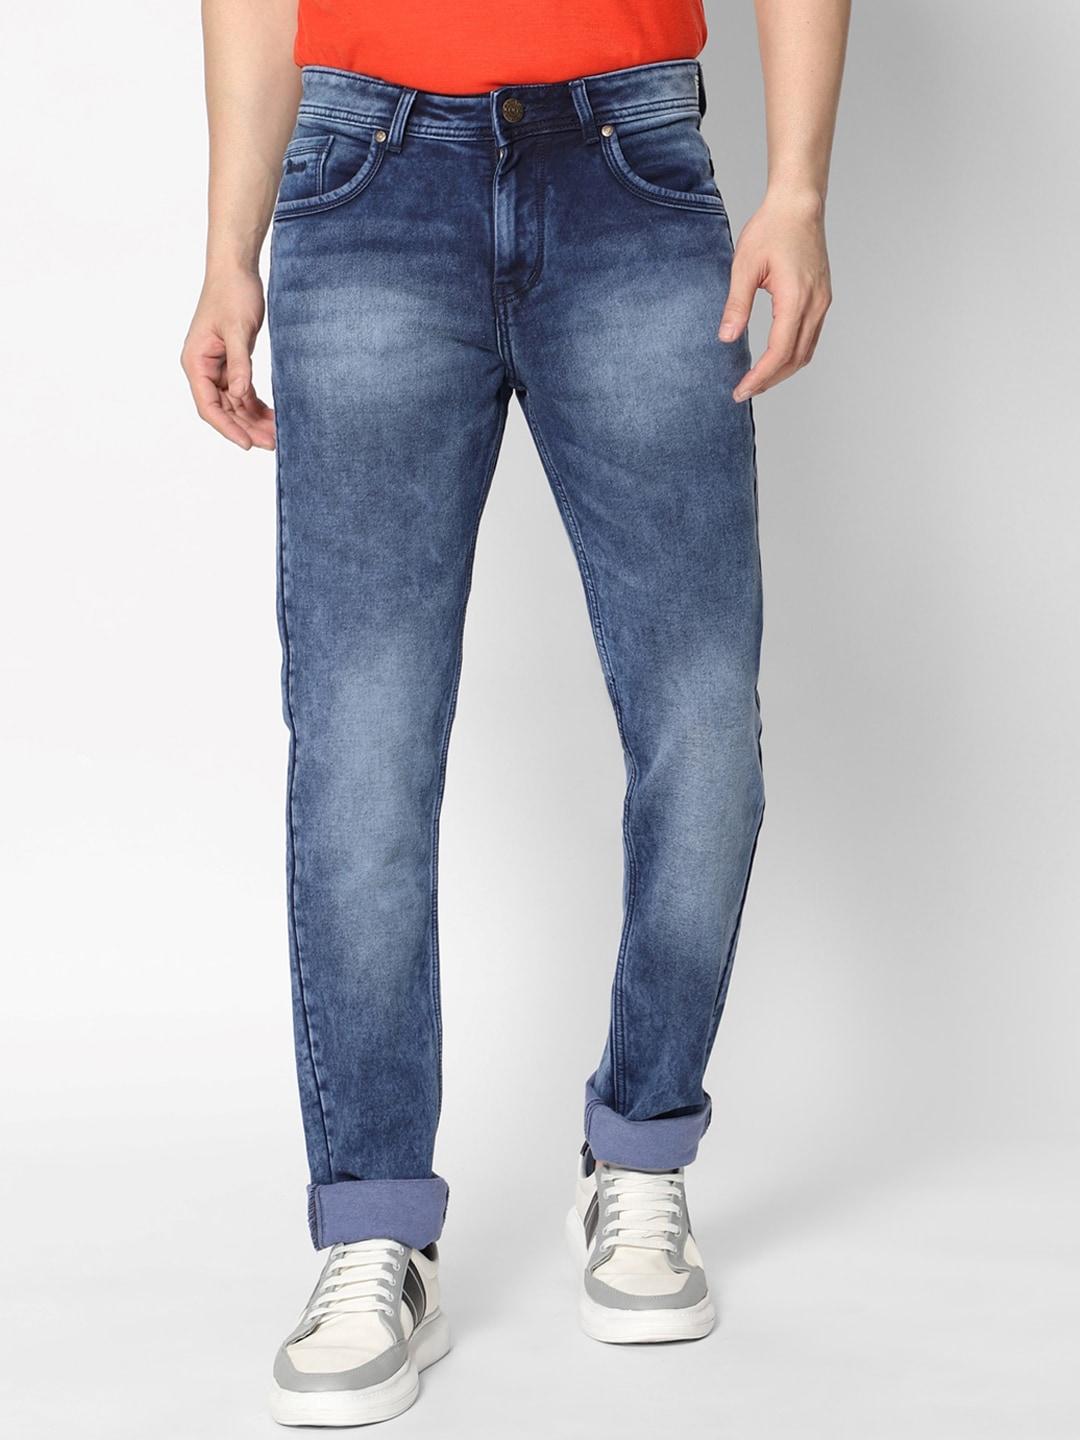 HJ HASASI Men Blue Light Fade Stretchable Jeans